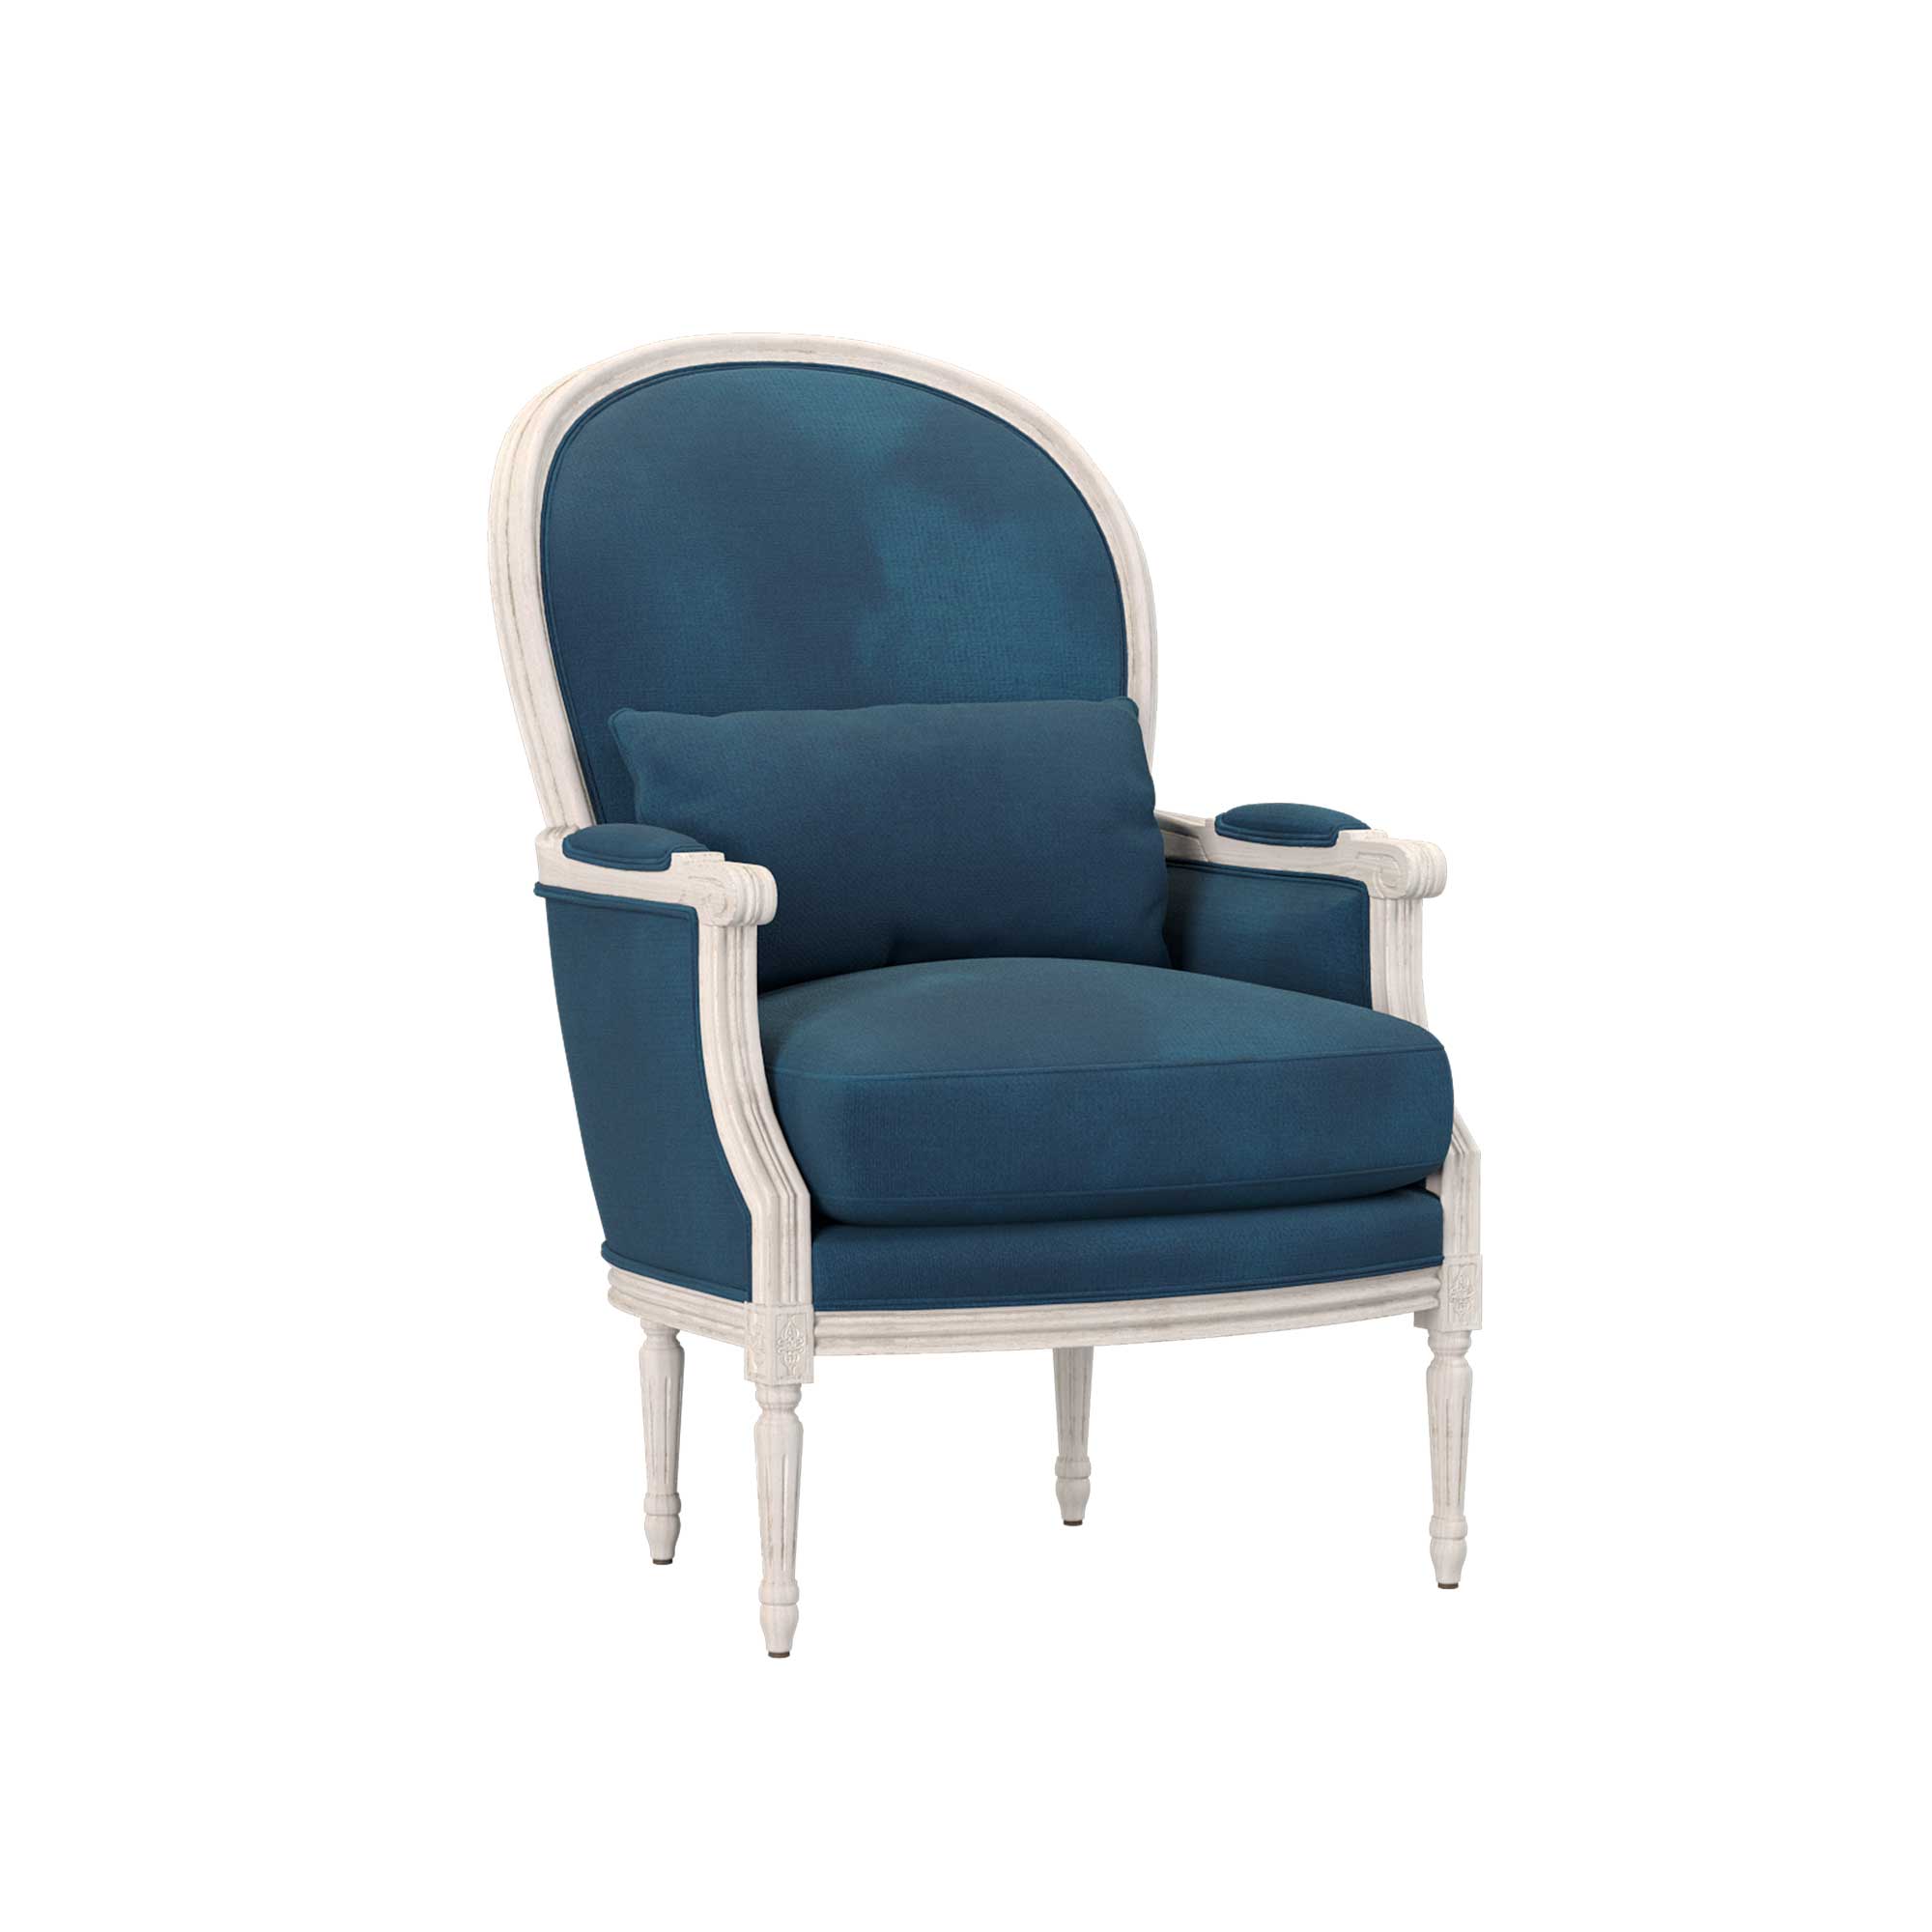 Adele Lounge Chair in Cobalt Blue